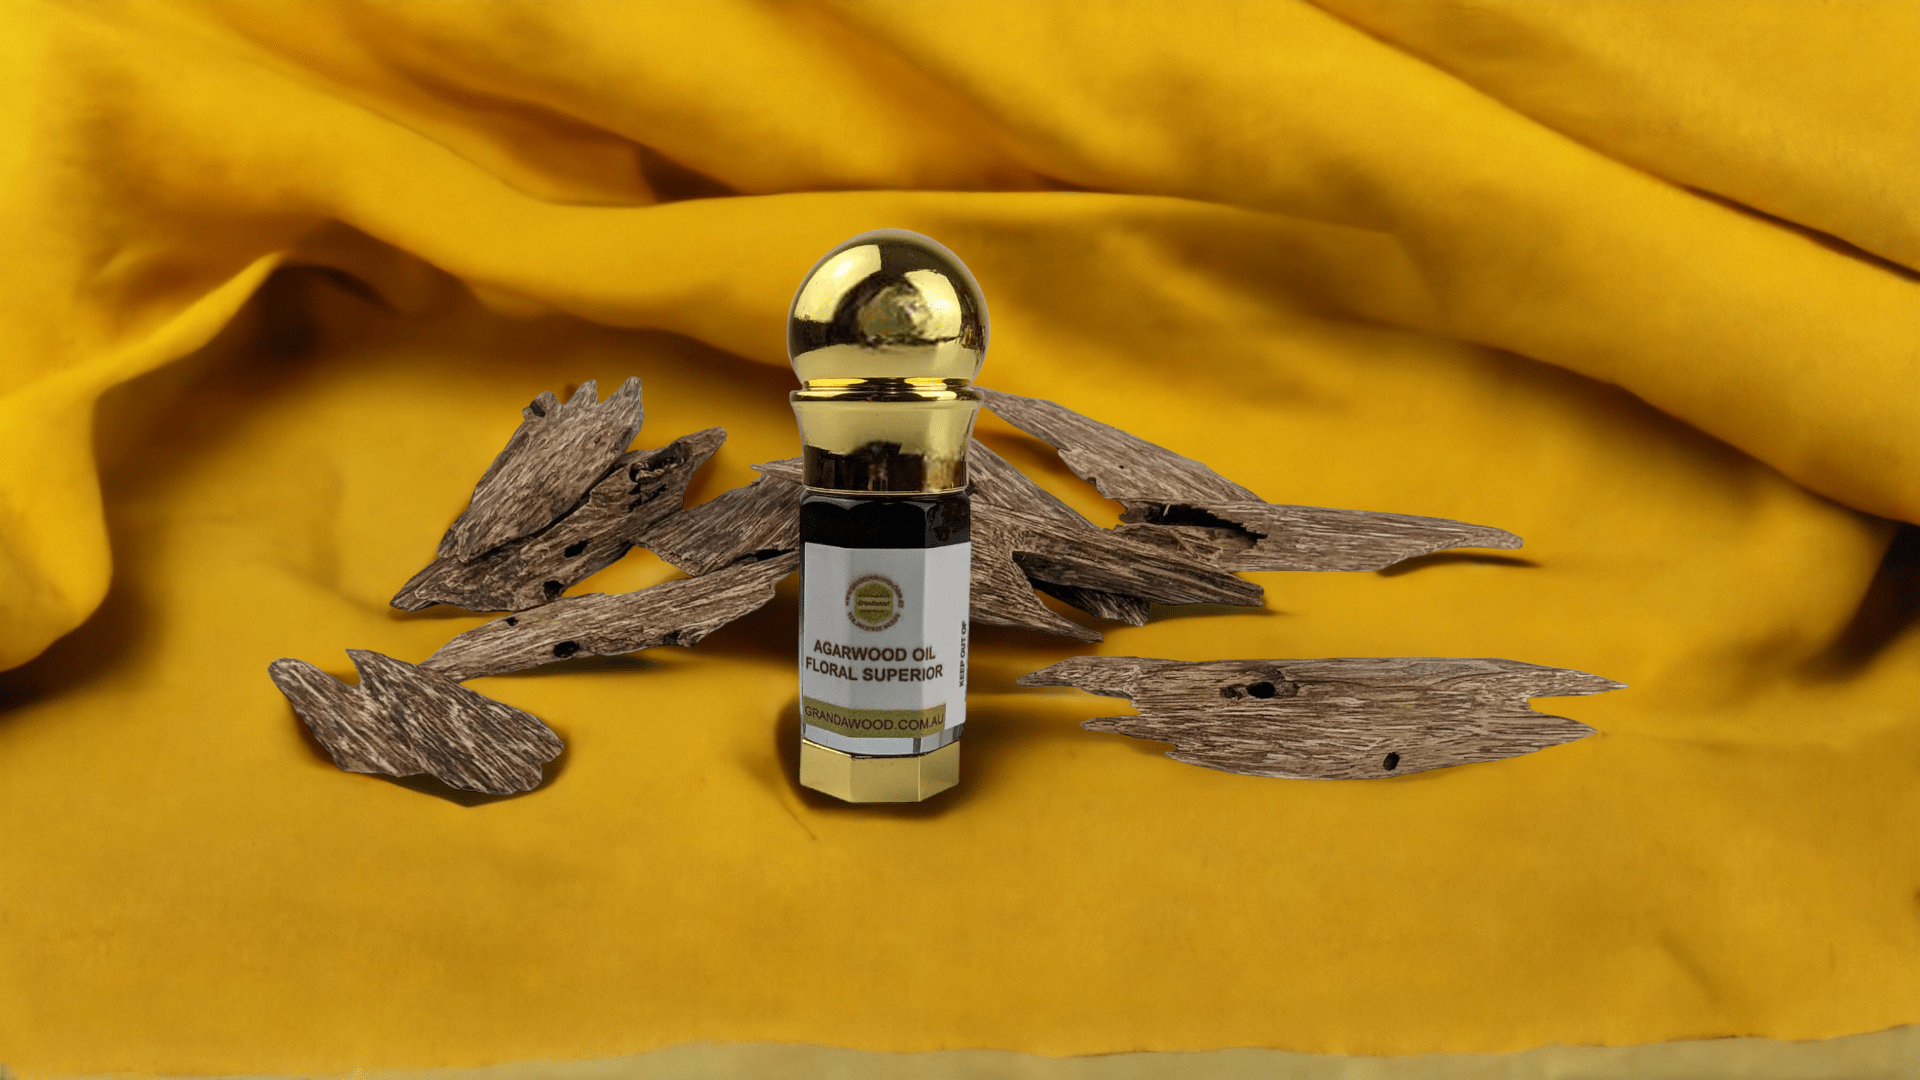 Specialty 100% Pure Cultivated Agarwood Oil (Oud) - Floral Superior - 3ml